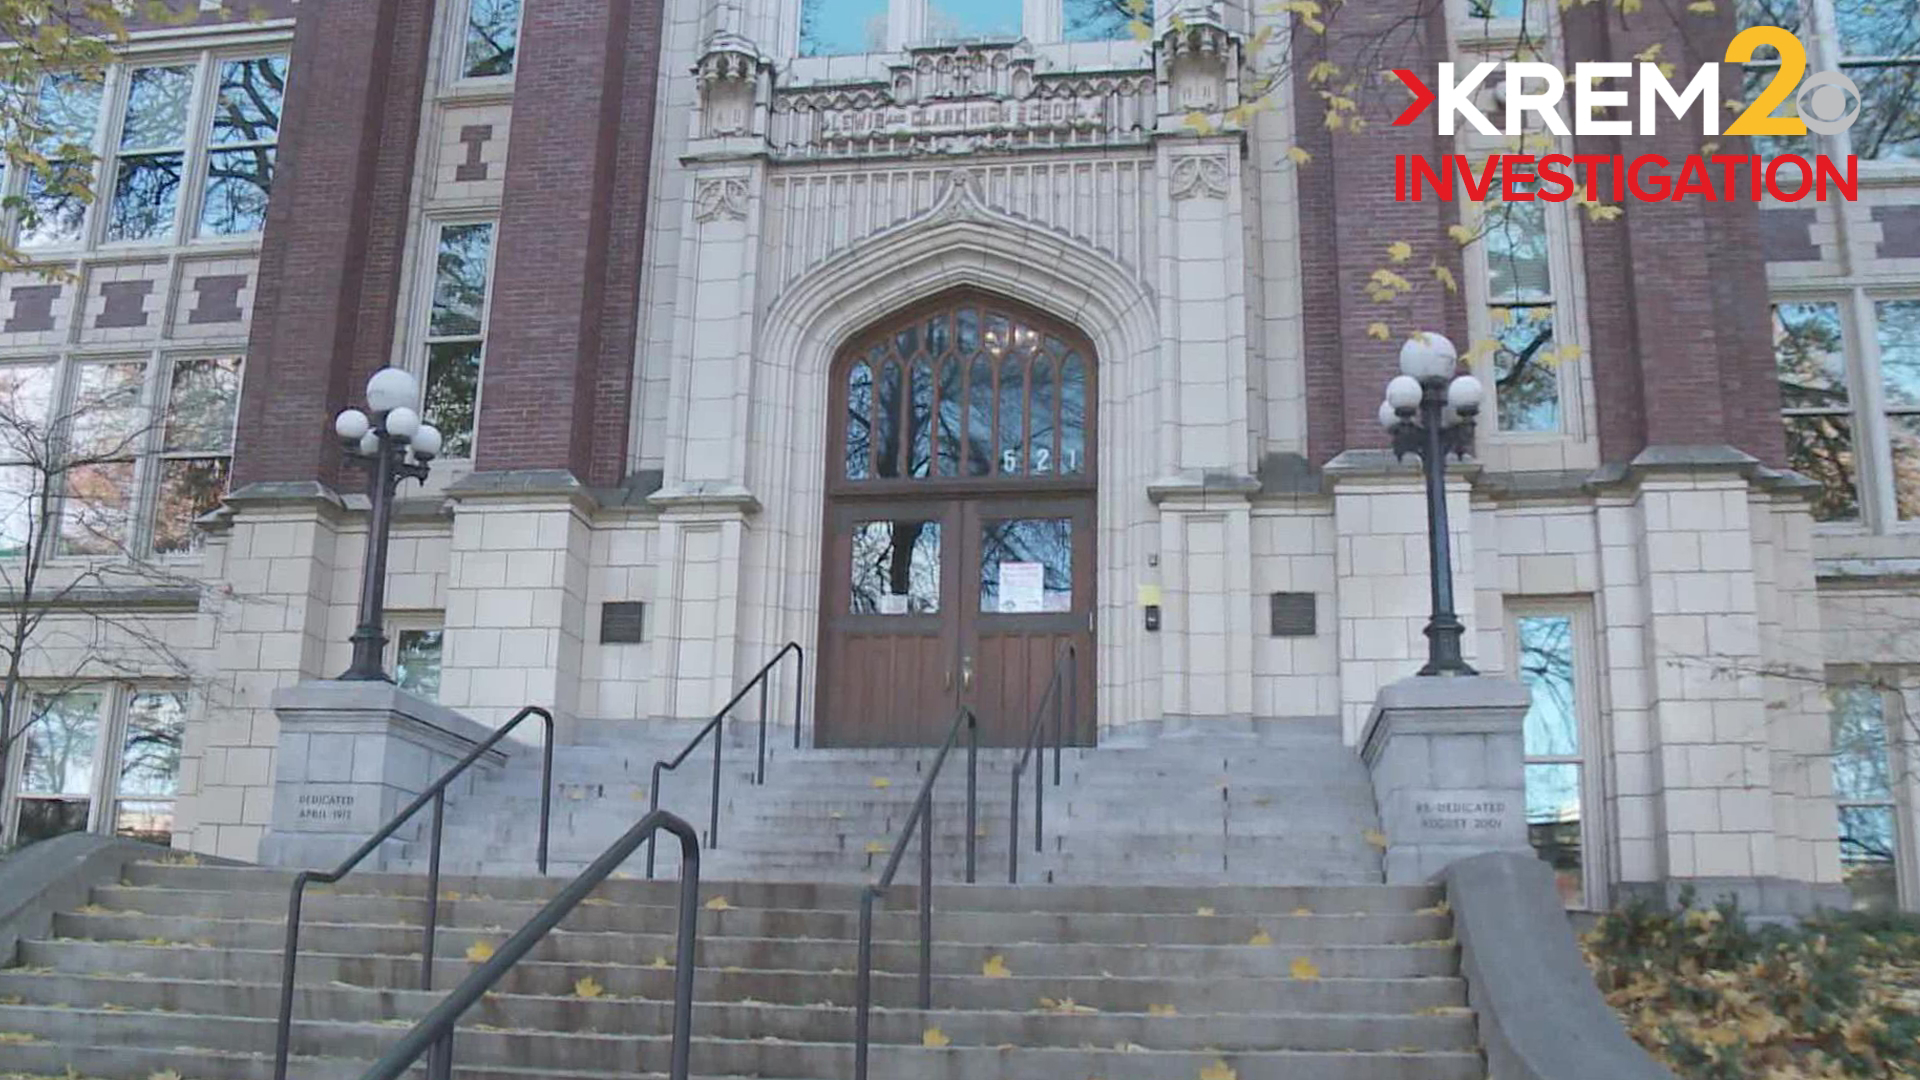 KREM 2 News obtainted 911 audio through a public records request that appears to show students yelling as staff members call police.